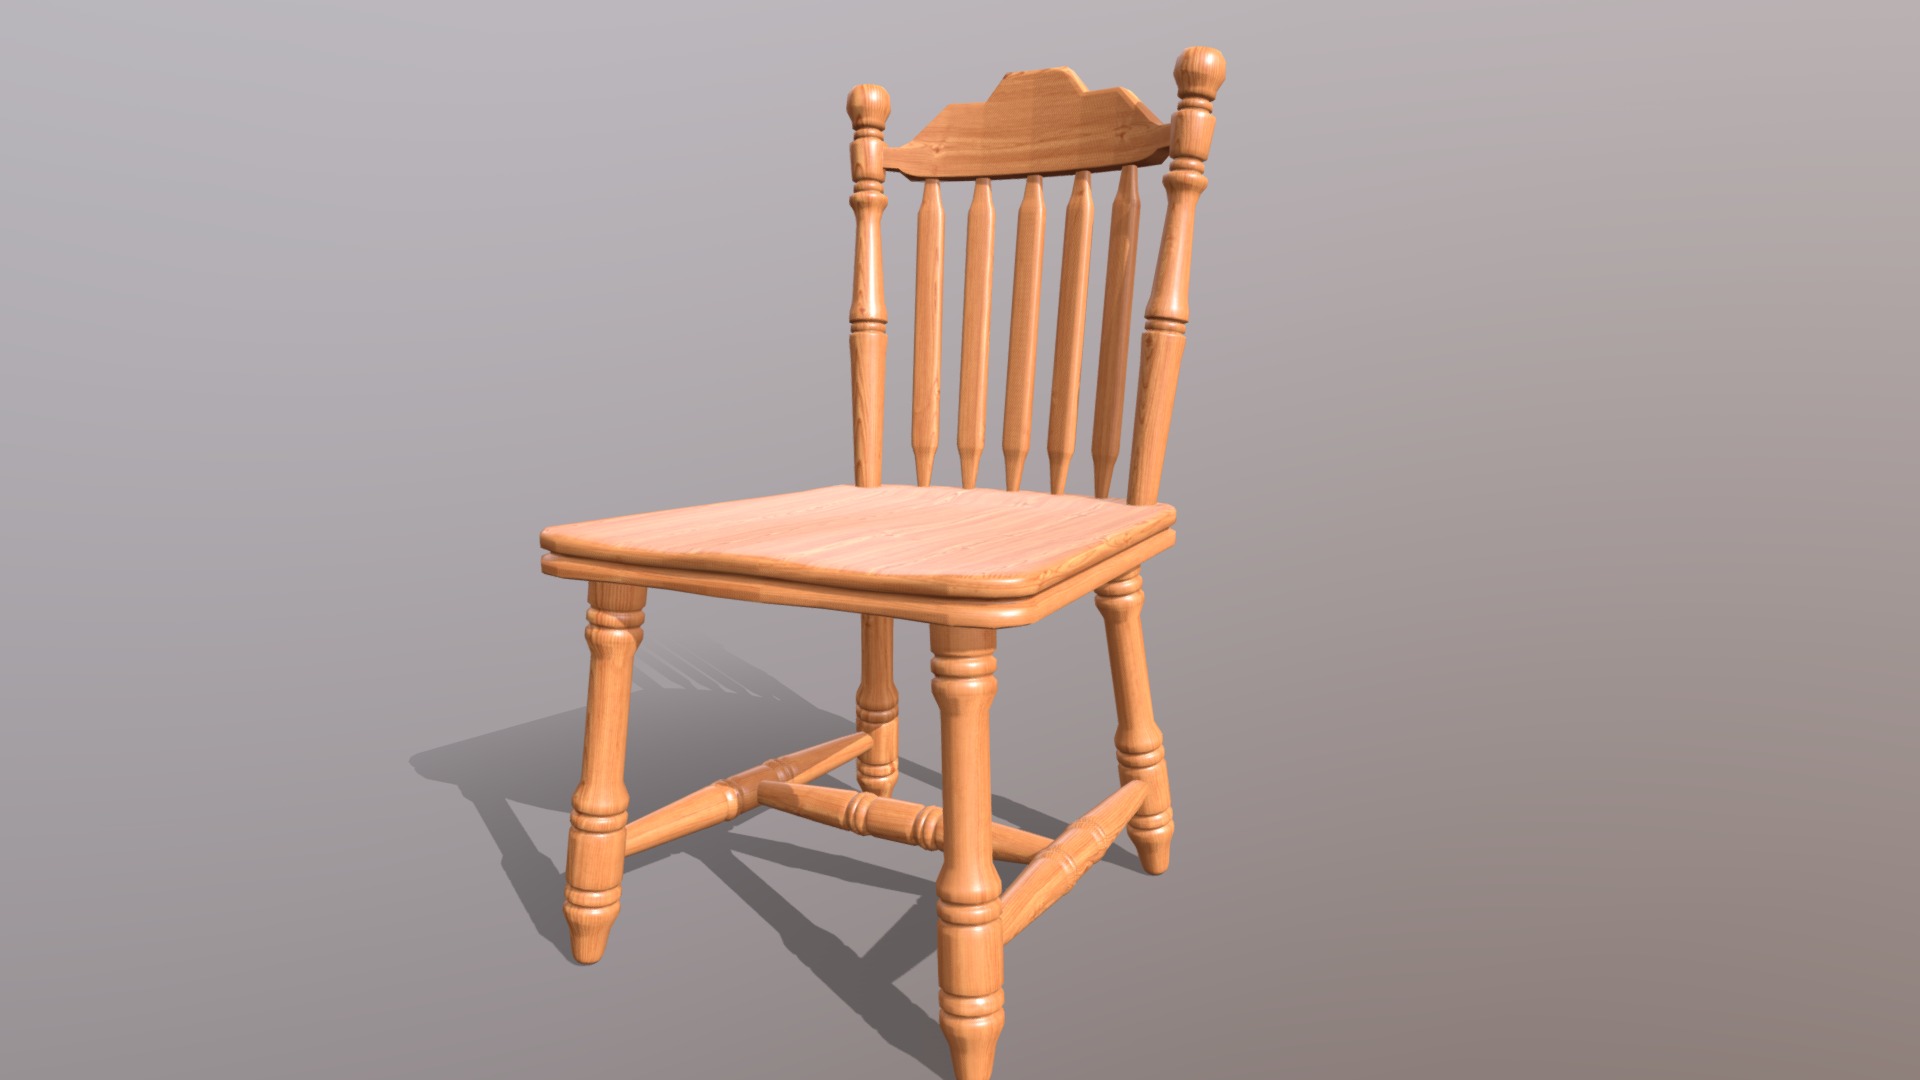 3D model Varnished Wood Chair - This is a 3D model of the Varnished Wood Chair. The 3D model is about a wooden chair with a cushion.